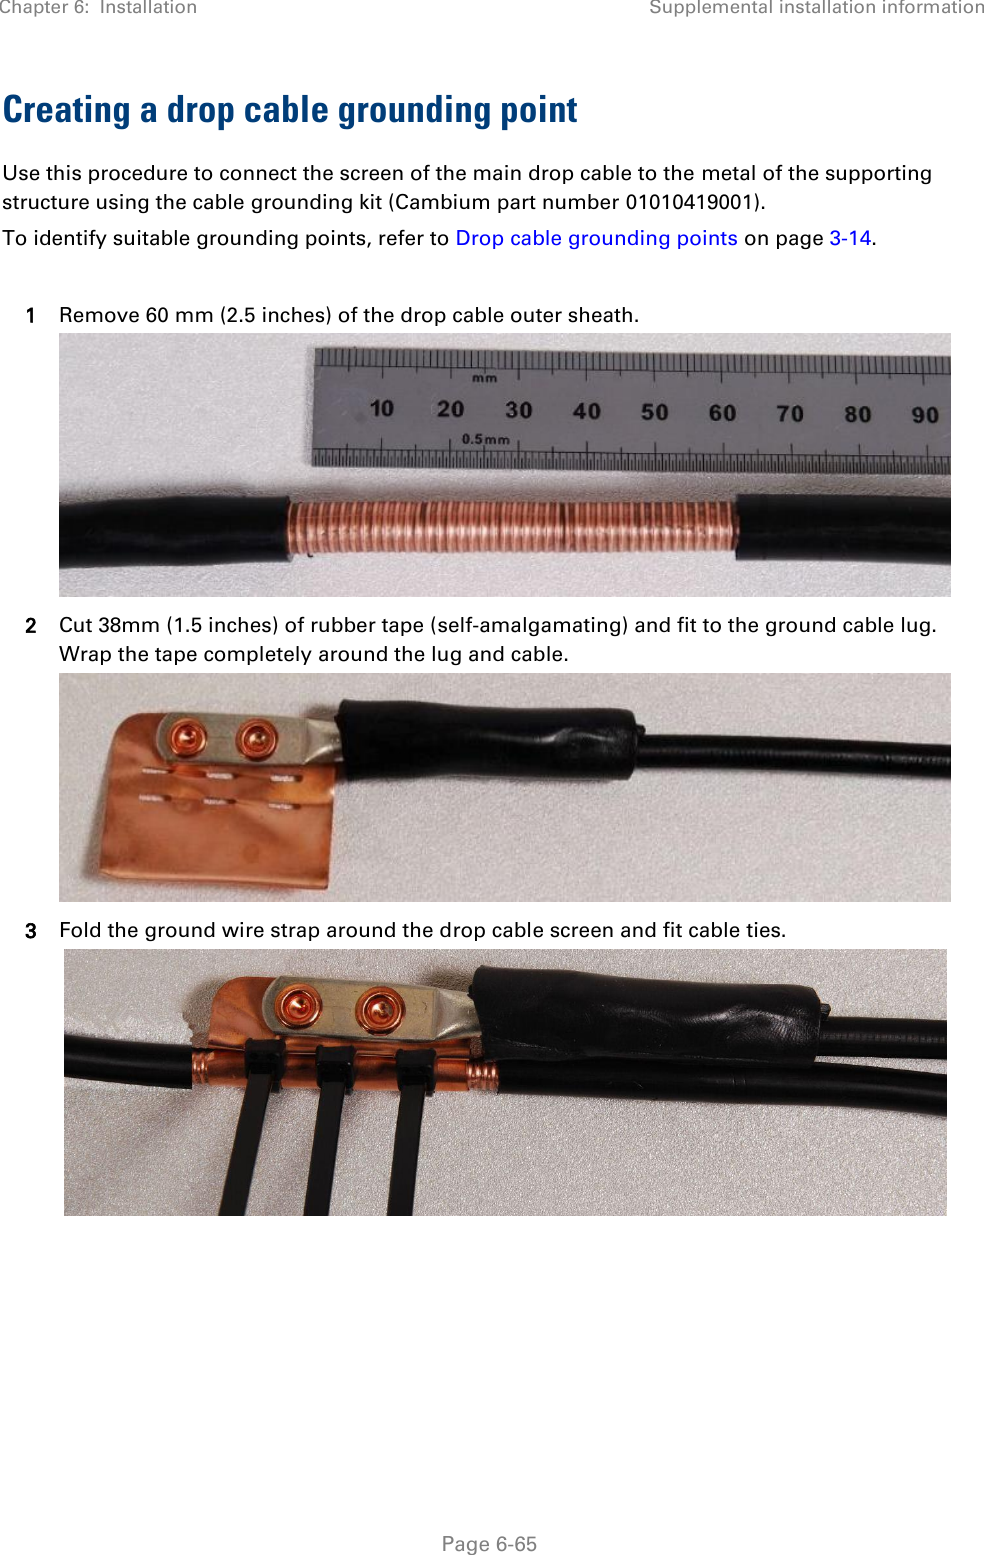 Chapter 6:  Installation Supplemental installation information   Page 6-65 Creating a drop cable grounding point Use this procedure to connect the screen of the main drop cable to the metal of the supporting structure using the cable grounding kit (Cambium part number 01010419001). To identify suitable grounding points, refer to Drop cable grounding points on page 3-14.  1 Remove 60 mm (2.5 inches) of the drop cable outer sheath.  2 Cut 38mm (1.5 inches) of rubber tape (self-amalgamating) and fit to the ground cable lug. Wrap the tape completely around the lug and cable.  3 Fold the ground wire strap around the drop cable screen and fit cable ties.    